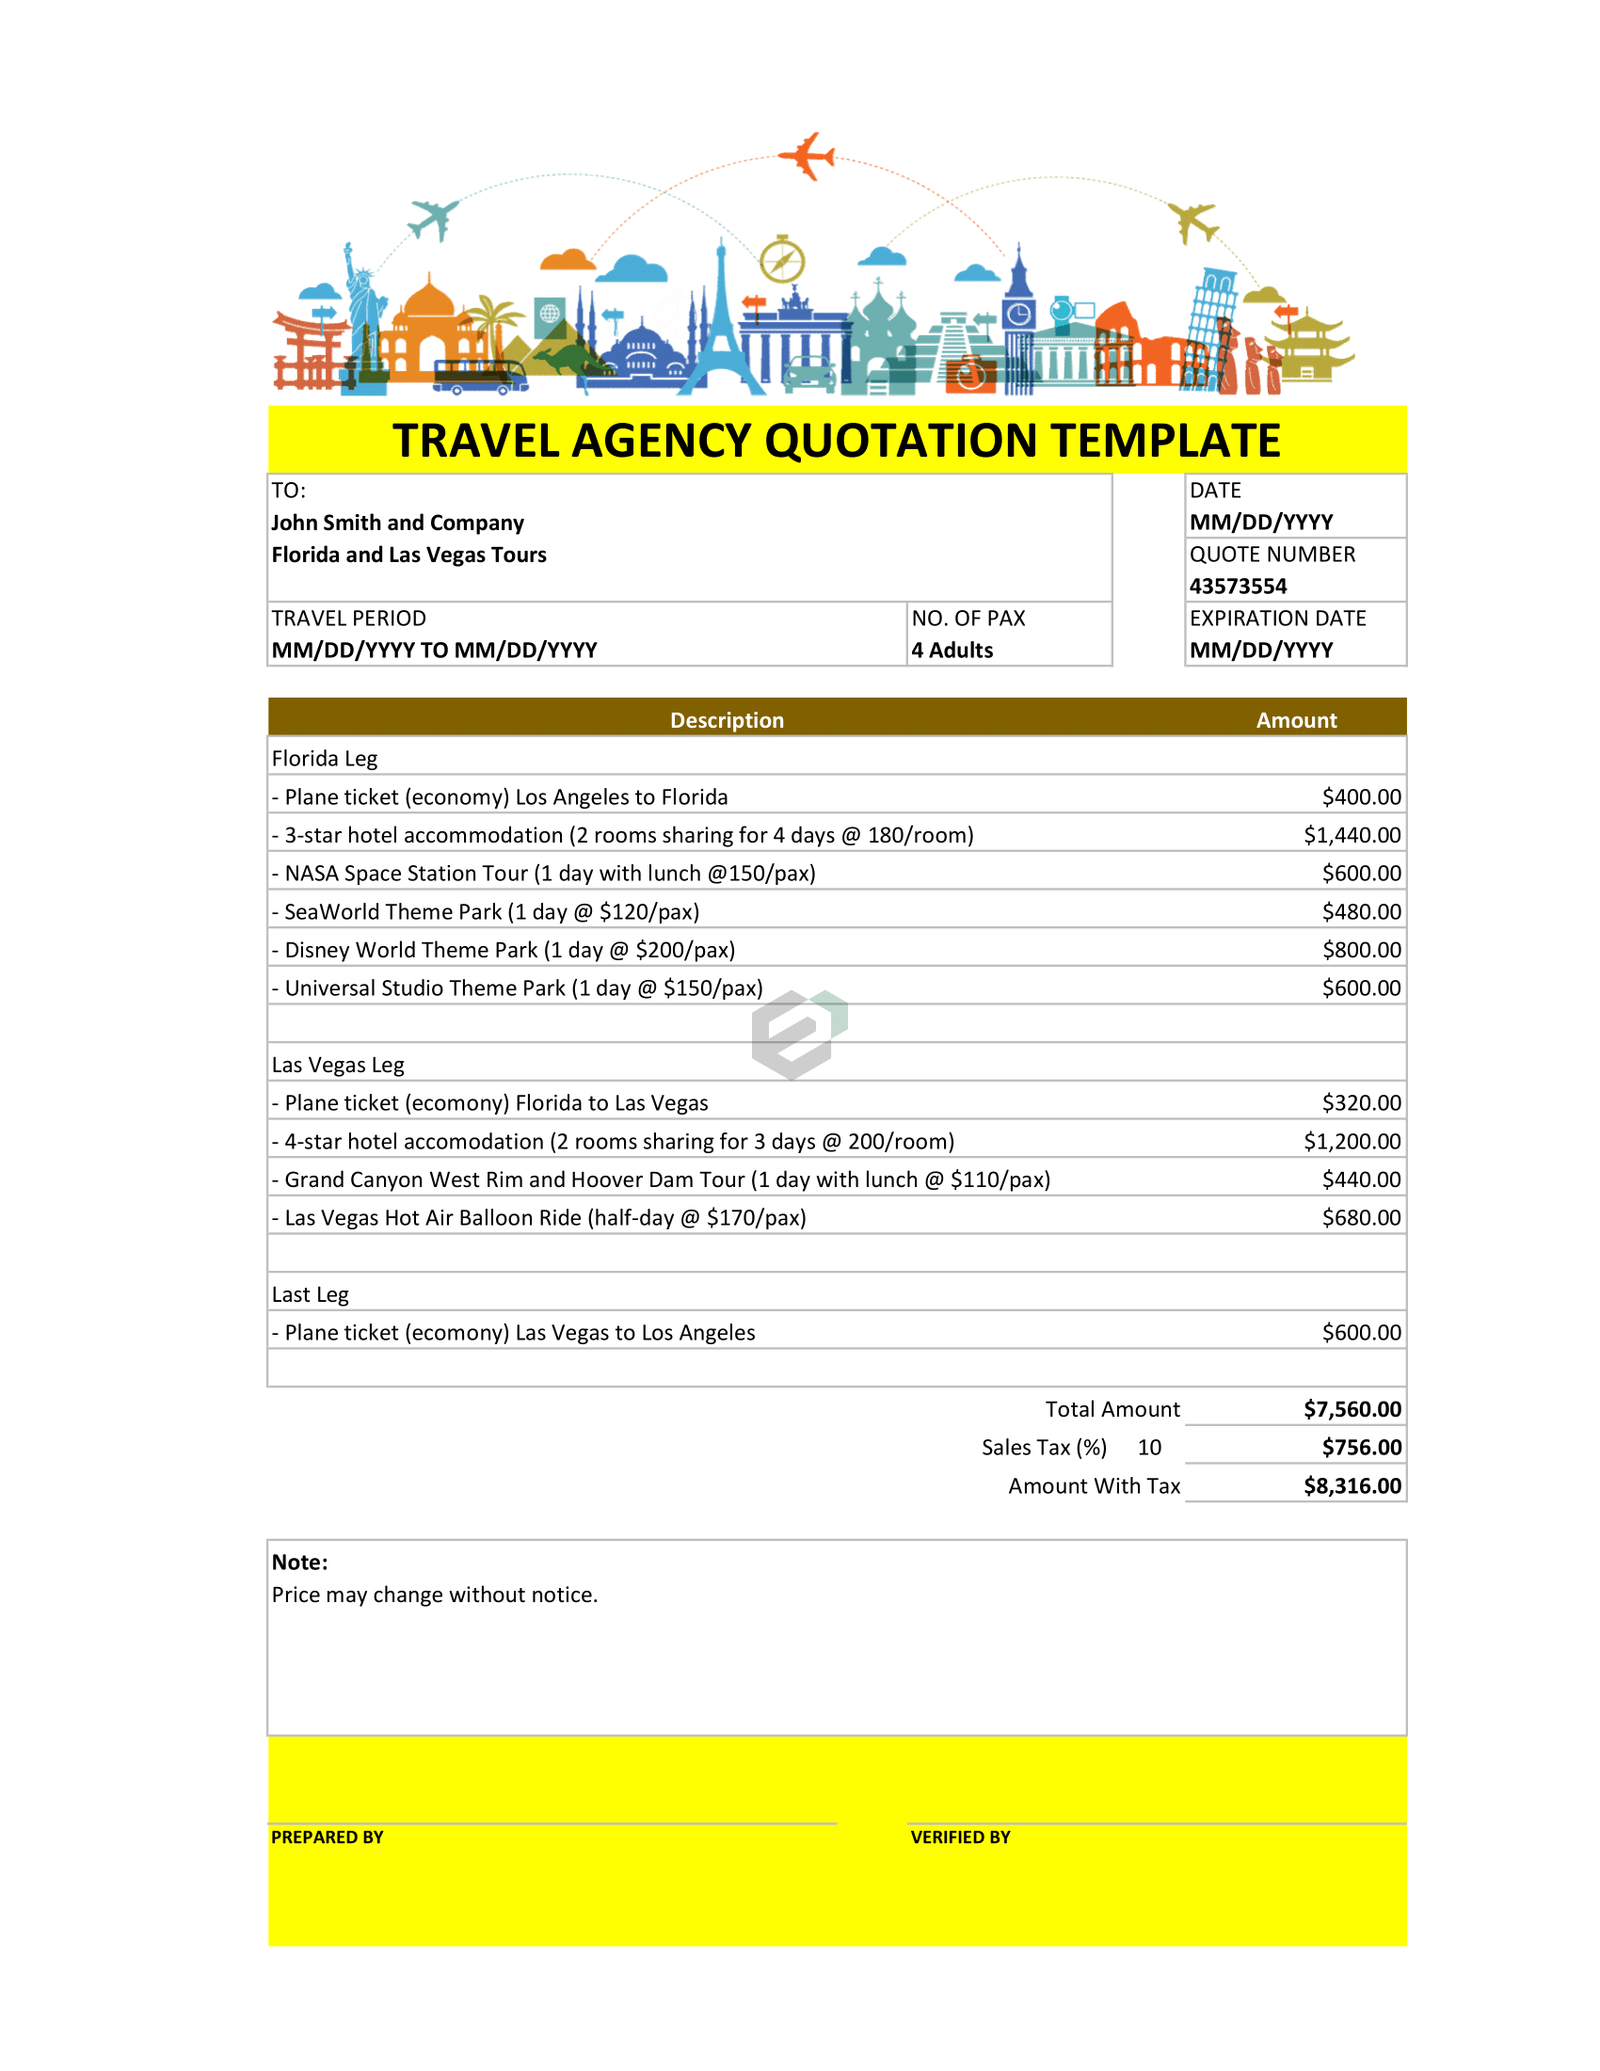 Travel Agency Quotation Template in Excel for travel agents and agency companies. Download Now.